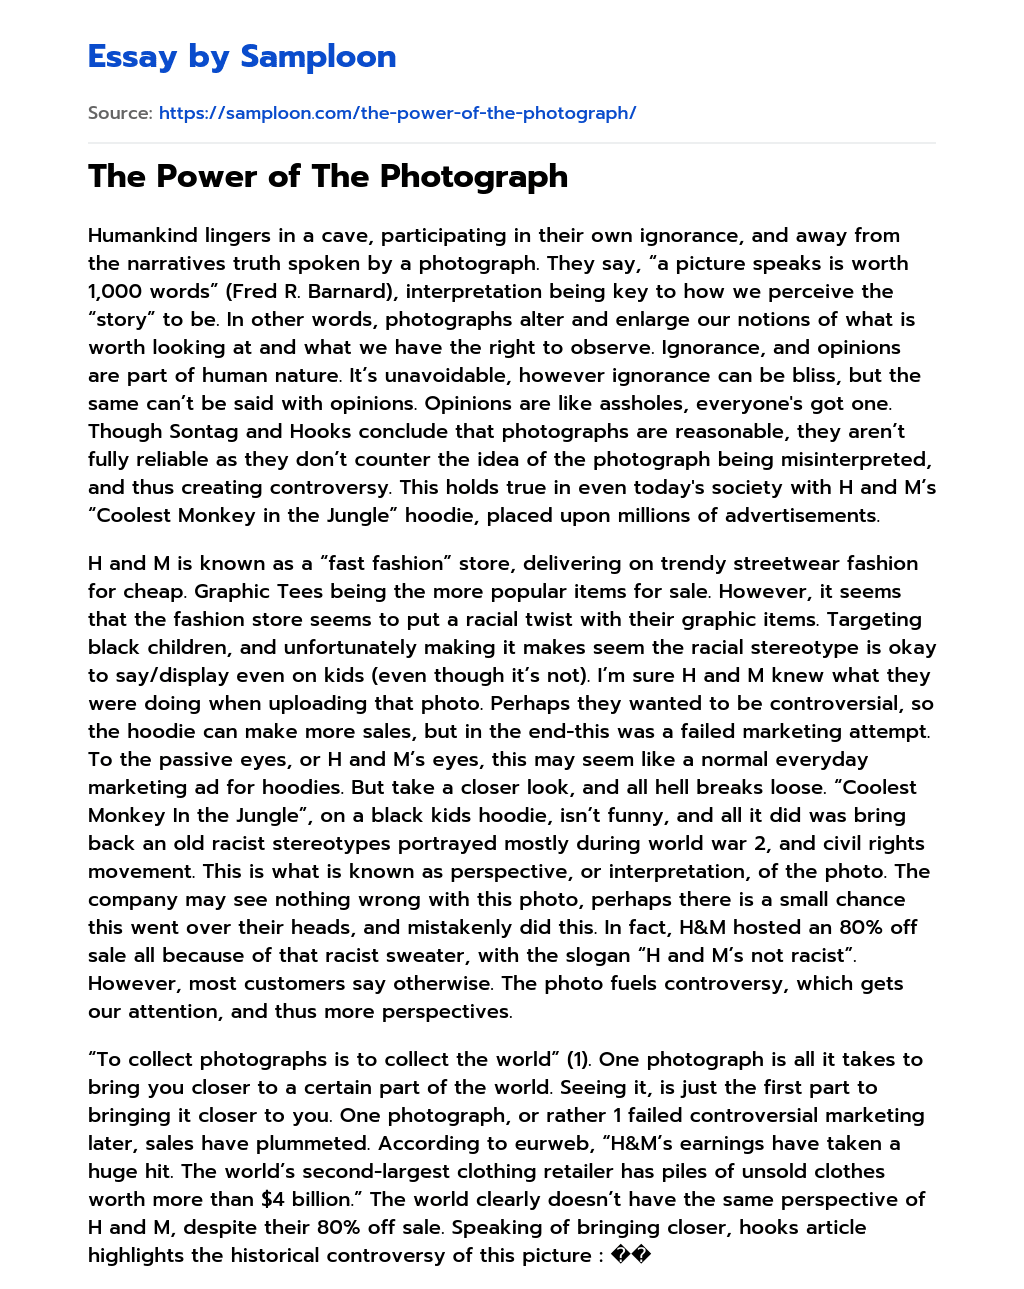 The Power of The Photograph essay